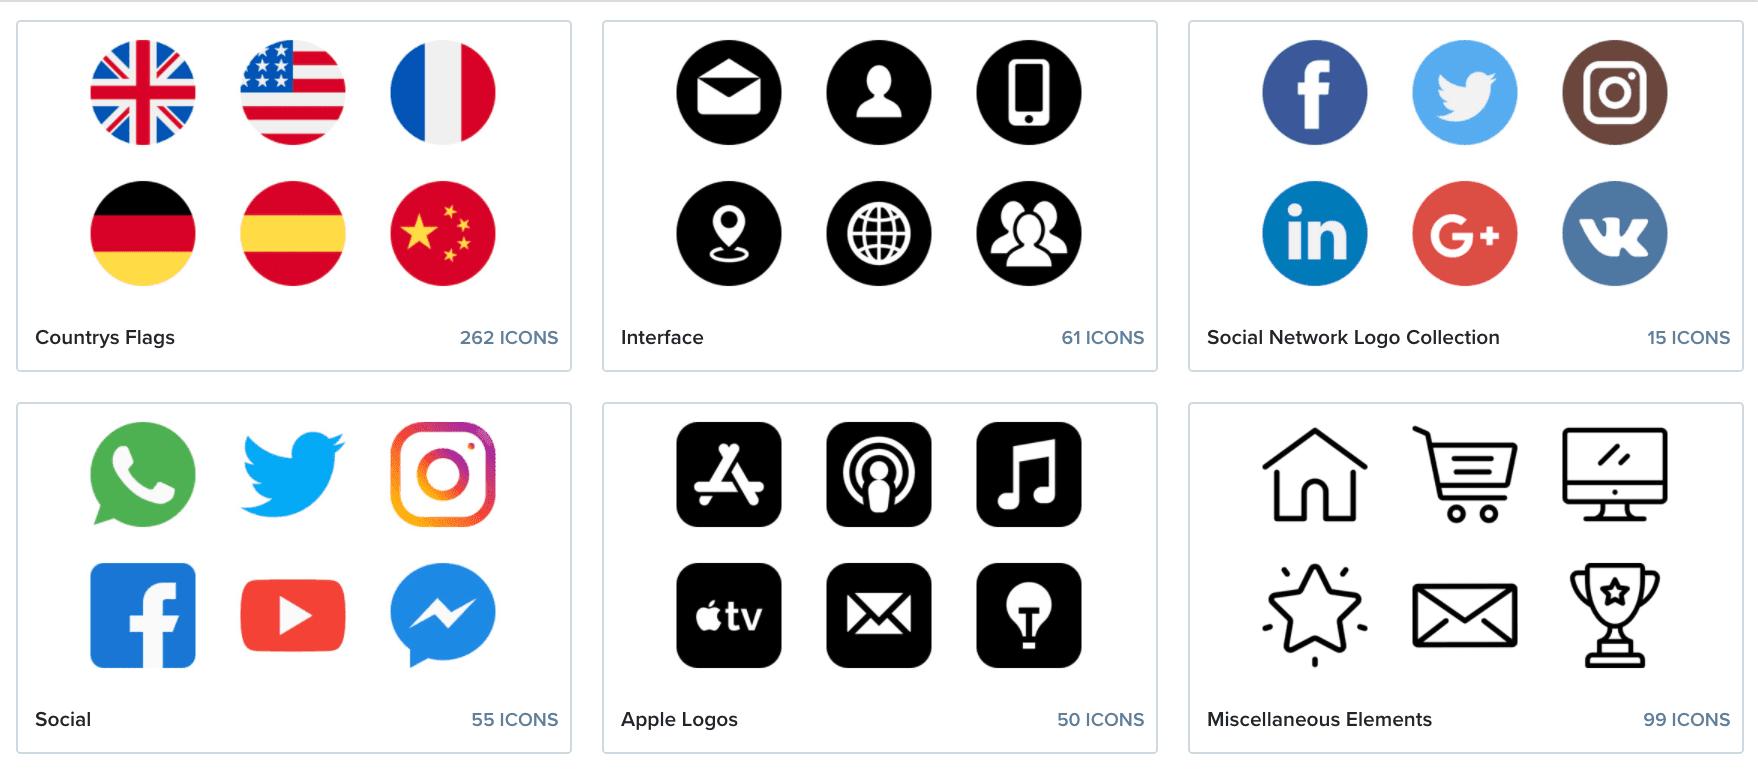 Free icons from Flaticon.